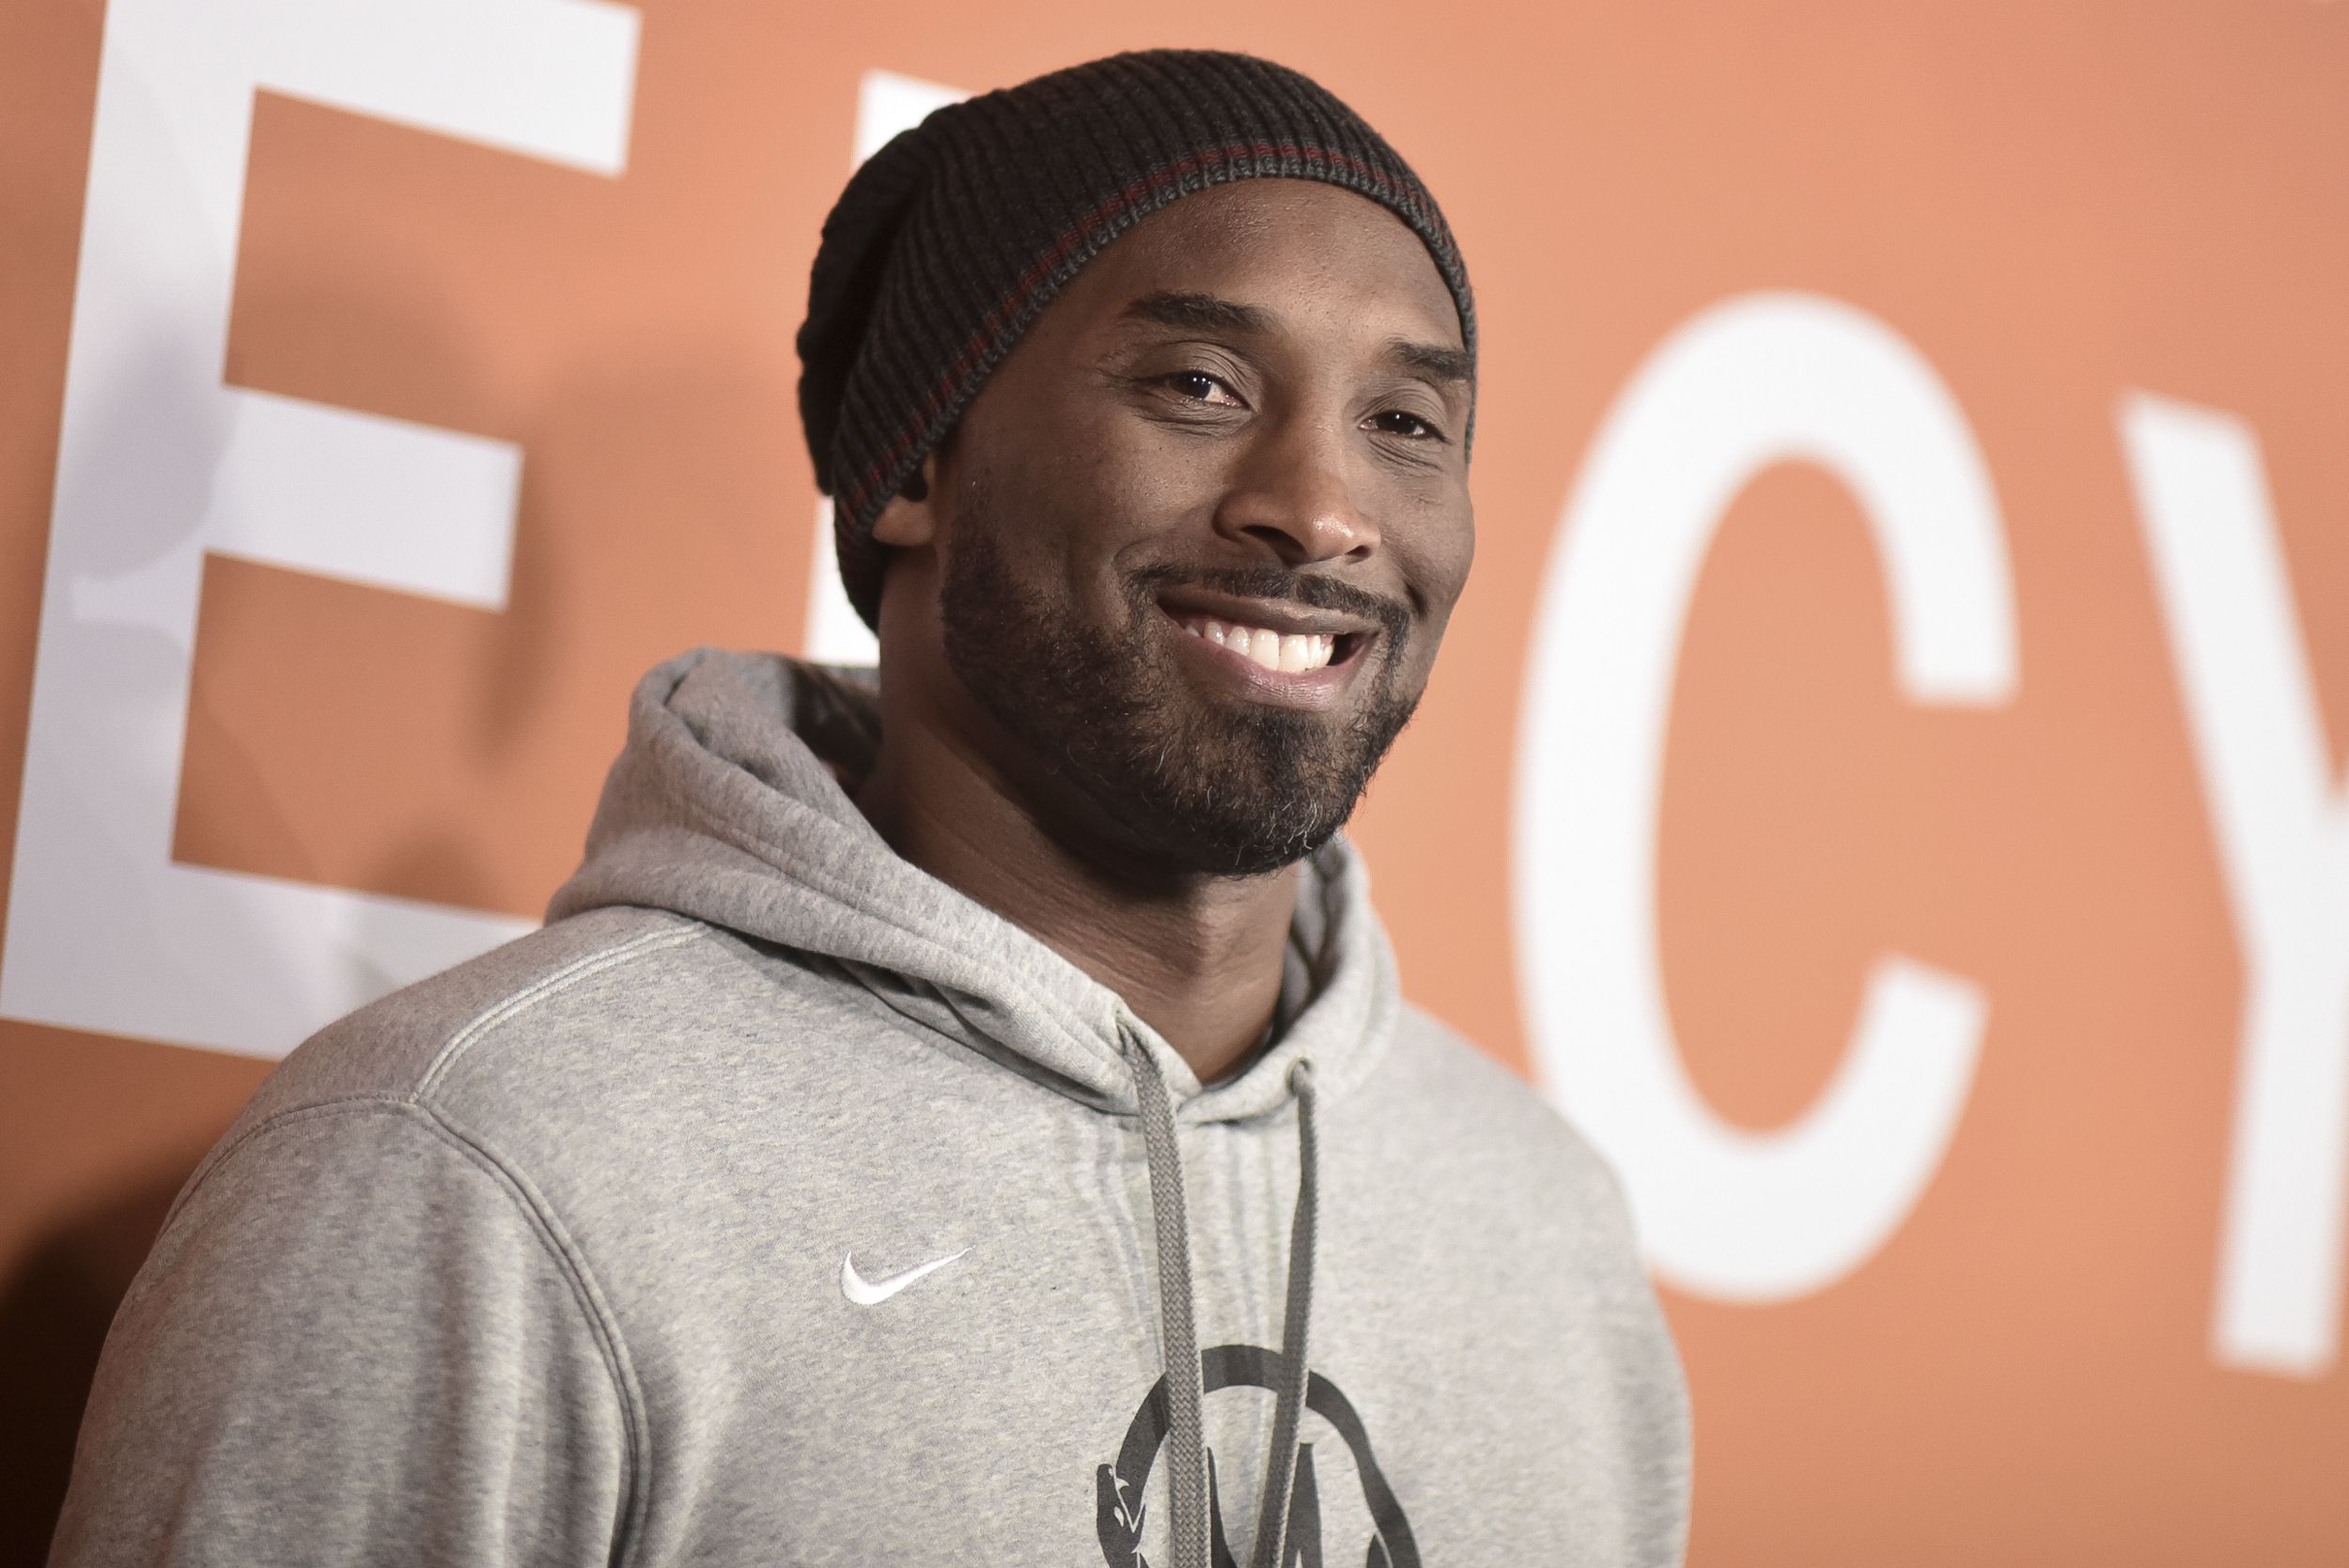 Kobe Bryant dies in helicopter crash: NFL world — including Giants' Saquon  Barkley, Jets' Le'Veon Bell, Eagles' Carson Wentz — reacts to stunning news  